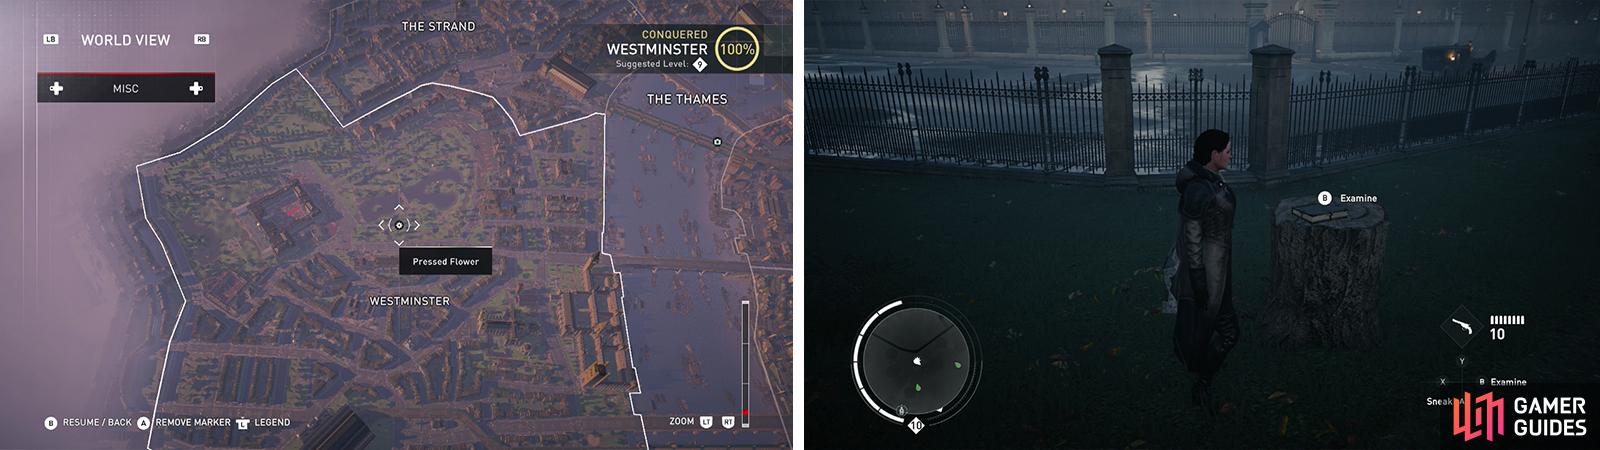 The Pressed Flower icon on the world map (left) and what they look like in-game (right).